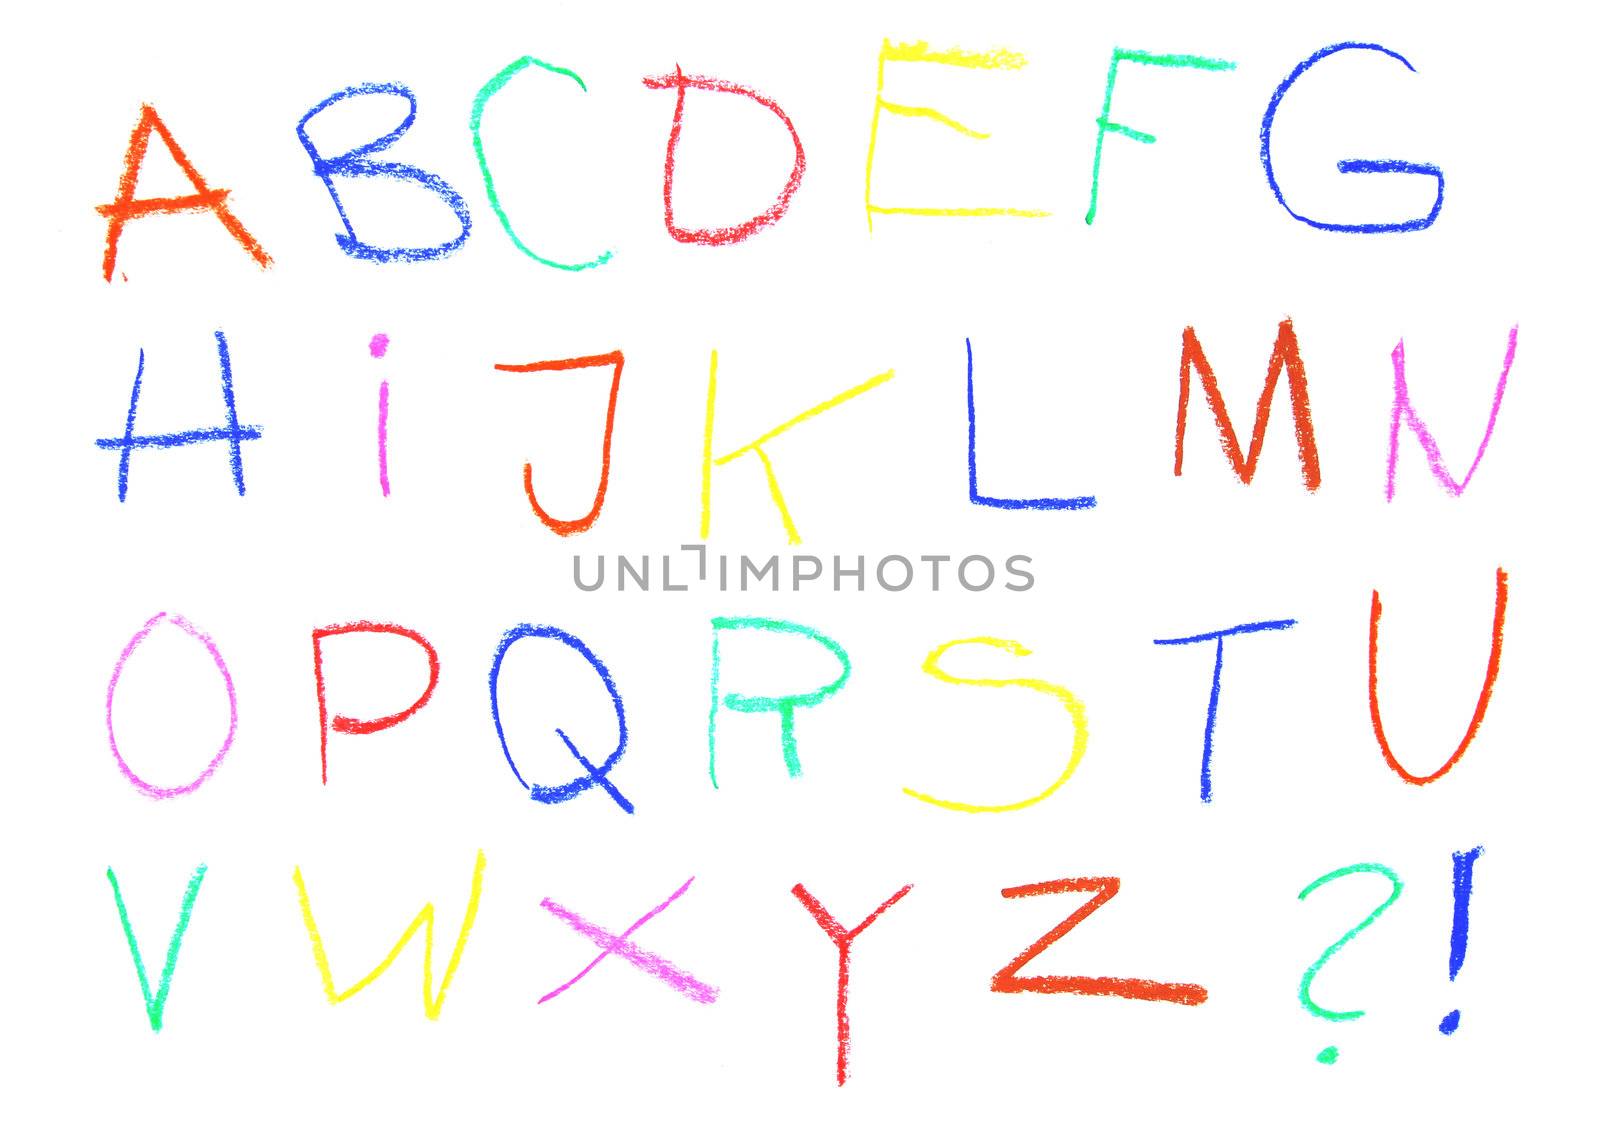 Child drawing of alphabet font made with wax crayons